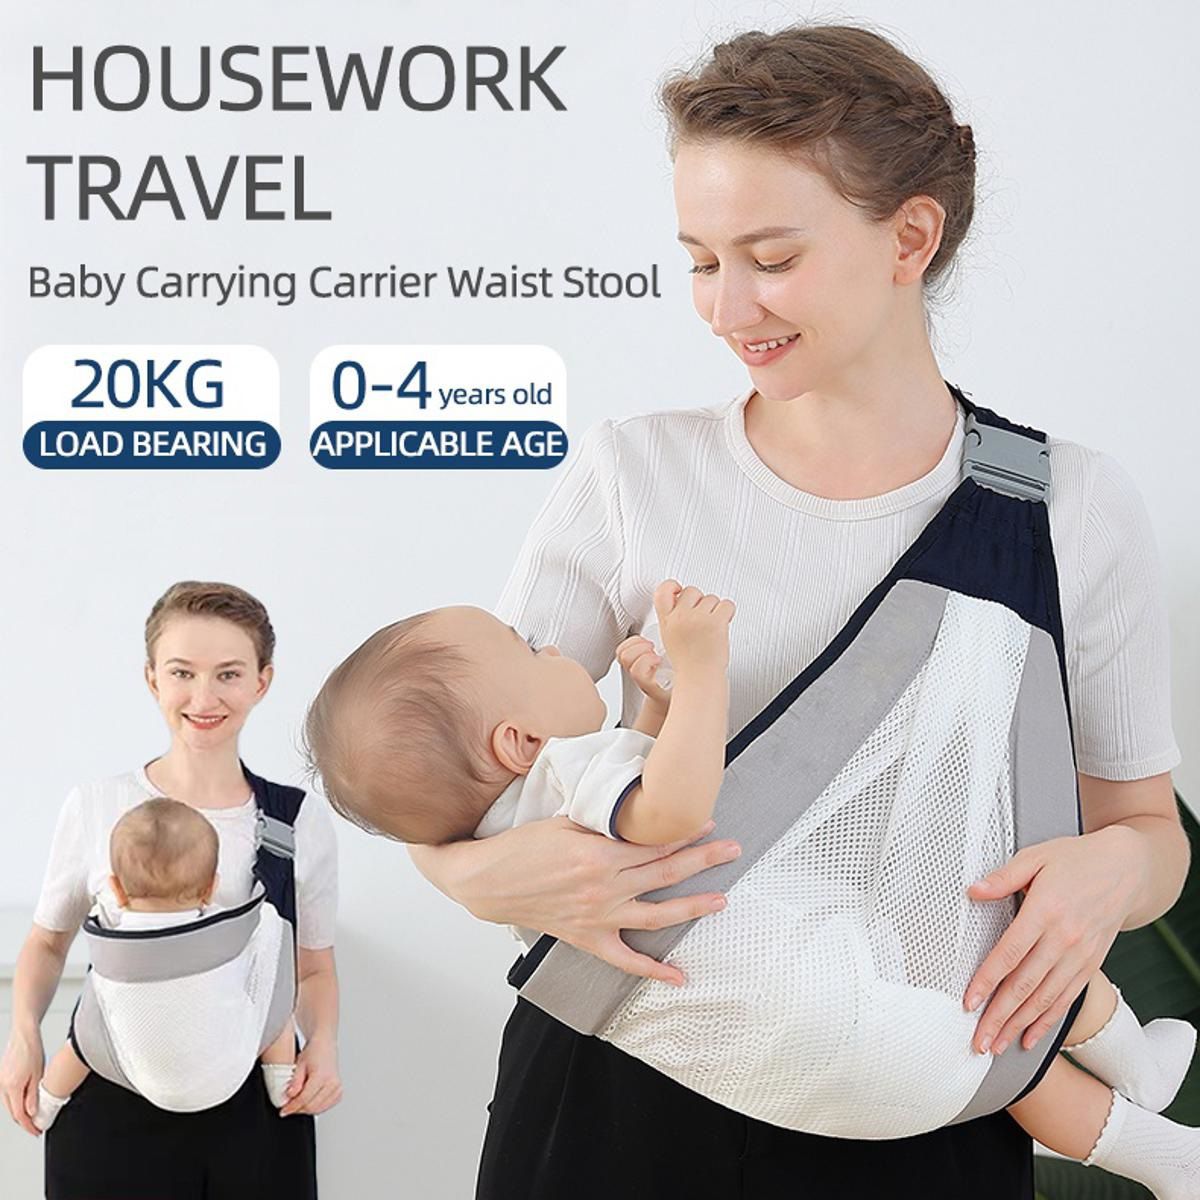 Baby Carrying Carrier Waist Stool